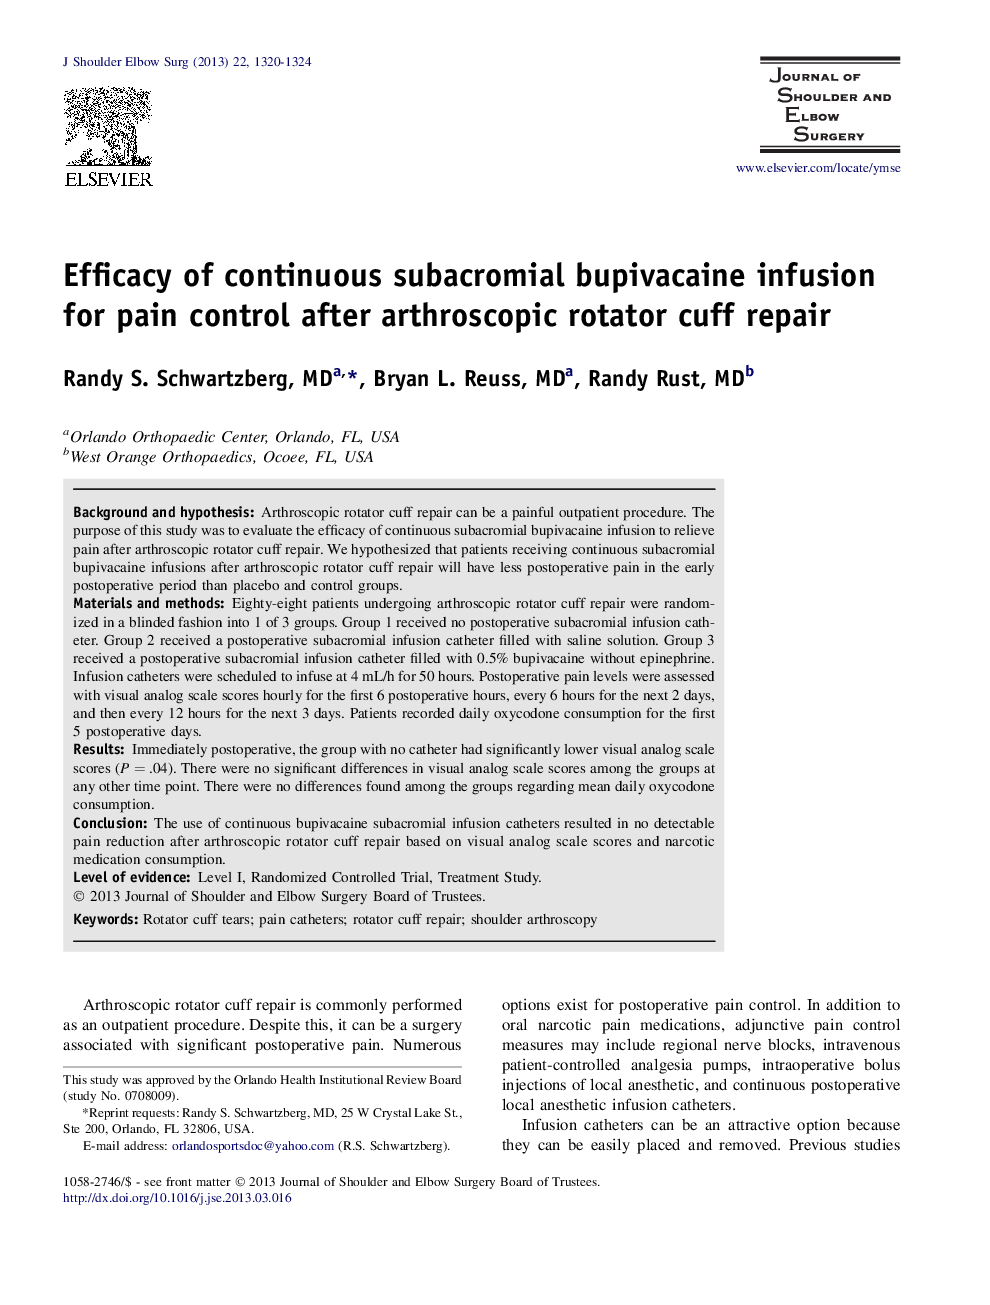 Efficacy of continuous subacromial bupivacaine infusion for pain control after arthroscopic rotator cuff repair 